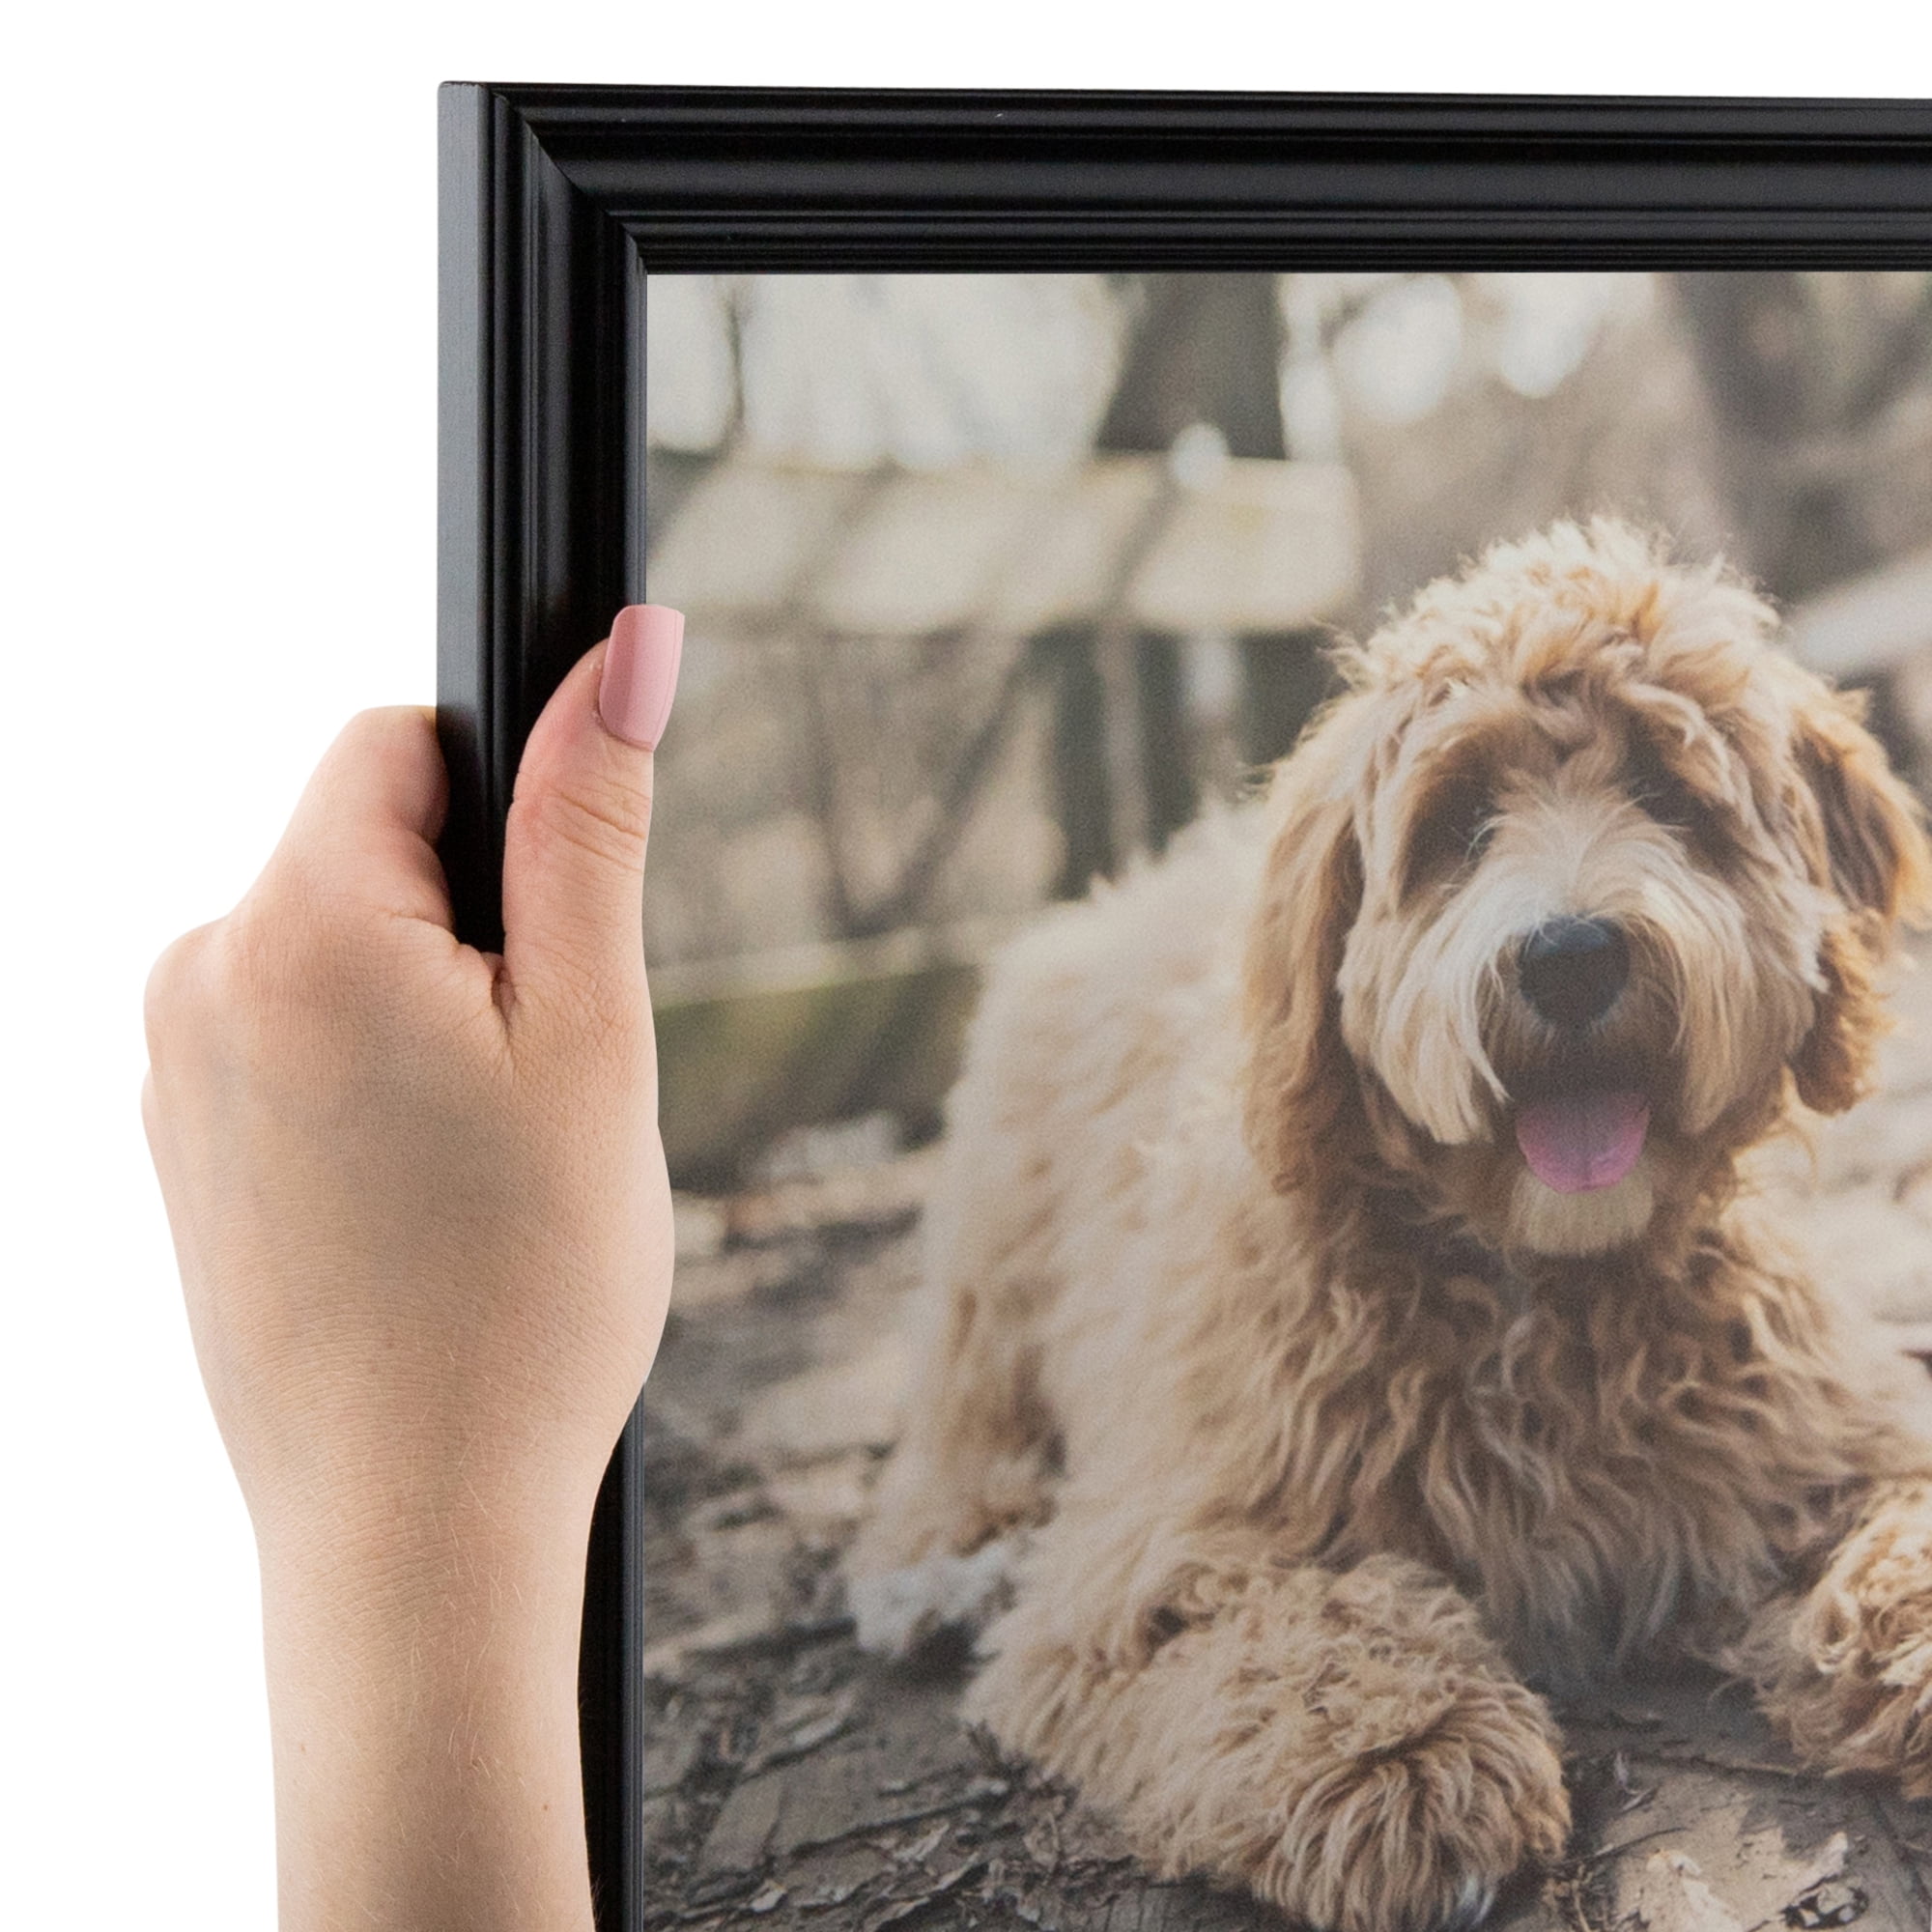 ArtToFrames 16x24 inch Windsor Walnut Picture Frame, This Brown MDF Poster Frame Is Great for Your Art or Photos, Comes with Styrene (4686), Size: 16